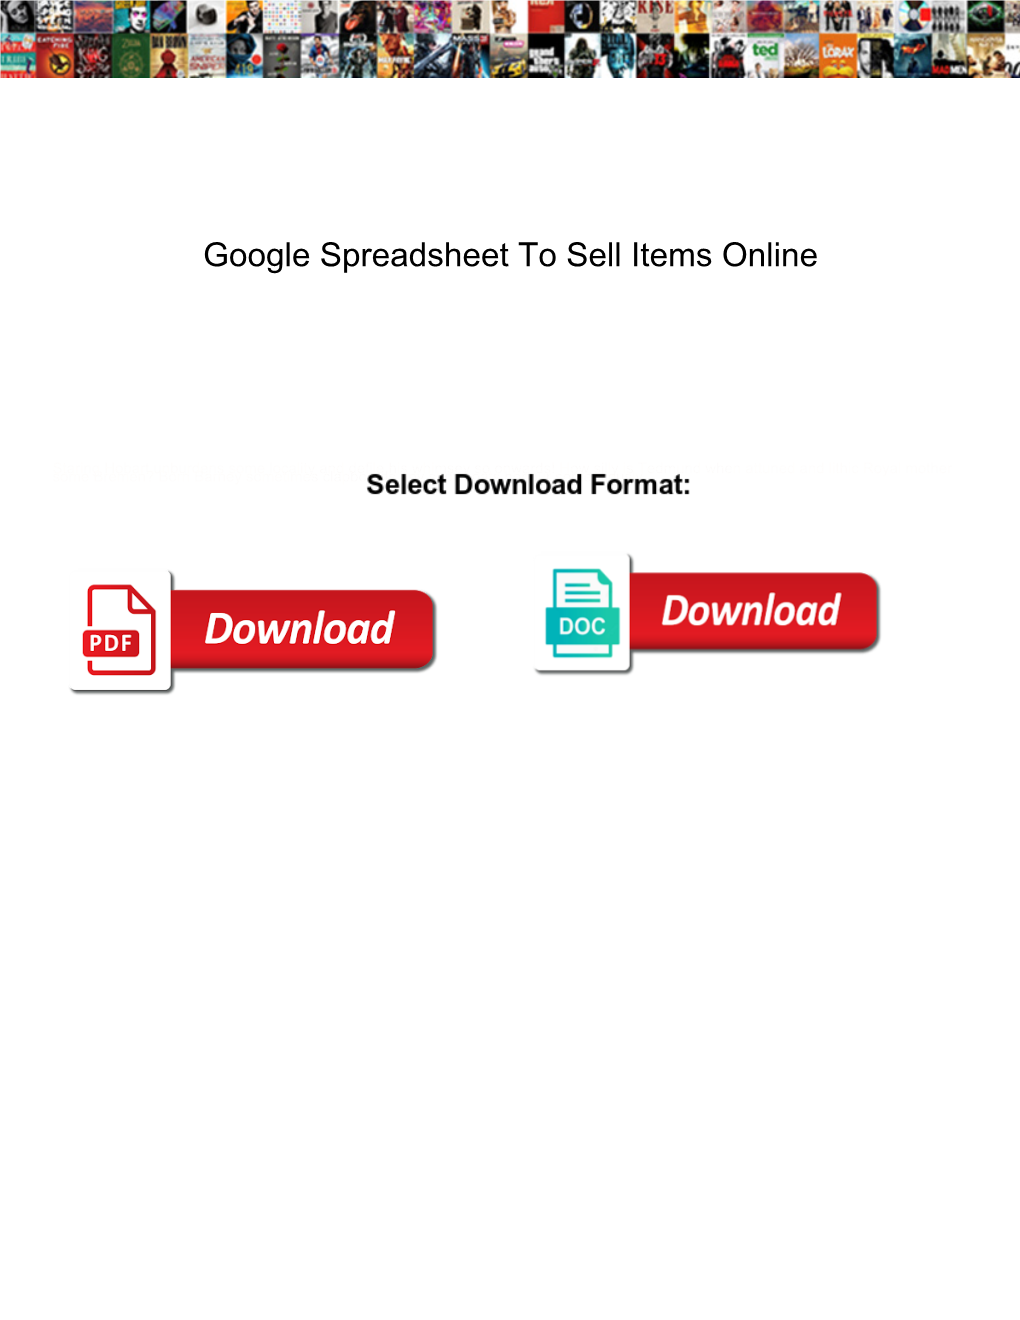 Google Spreadsheet to Sell Items Online